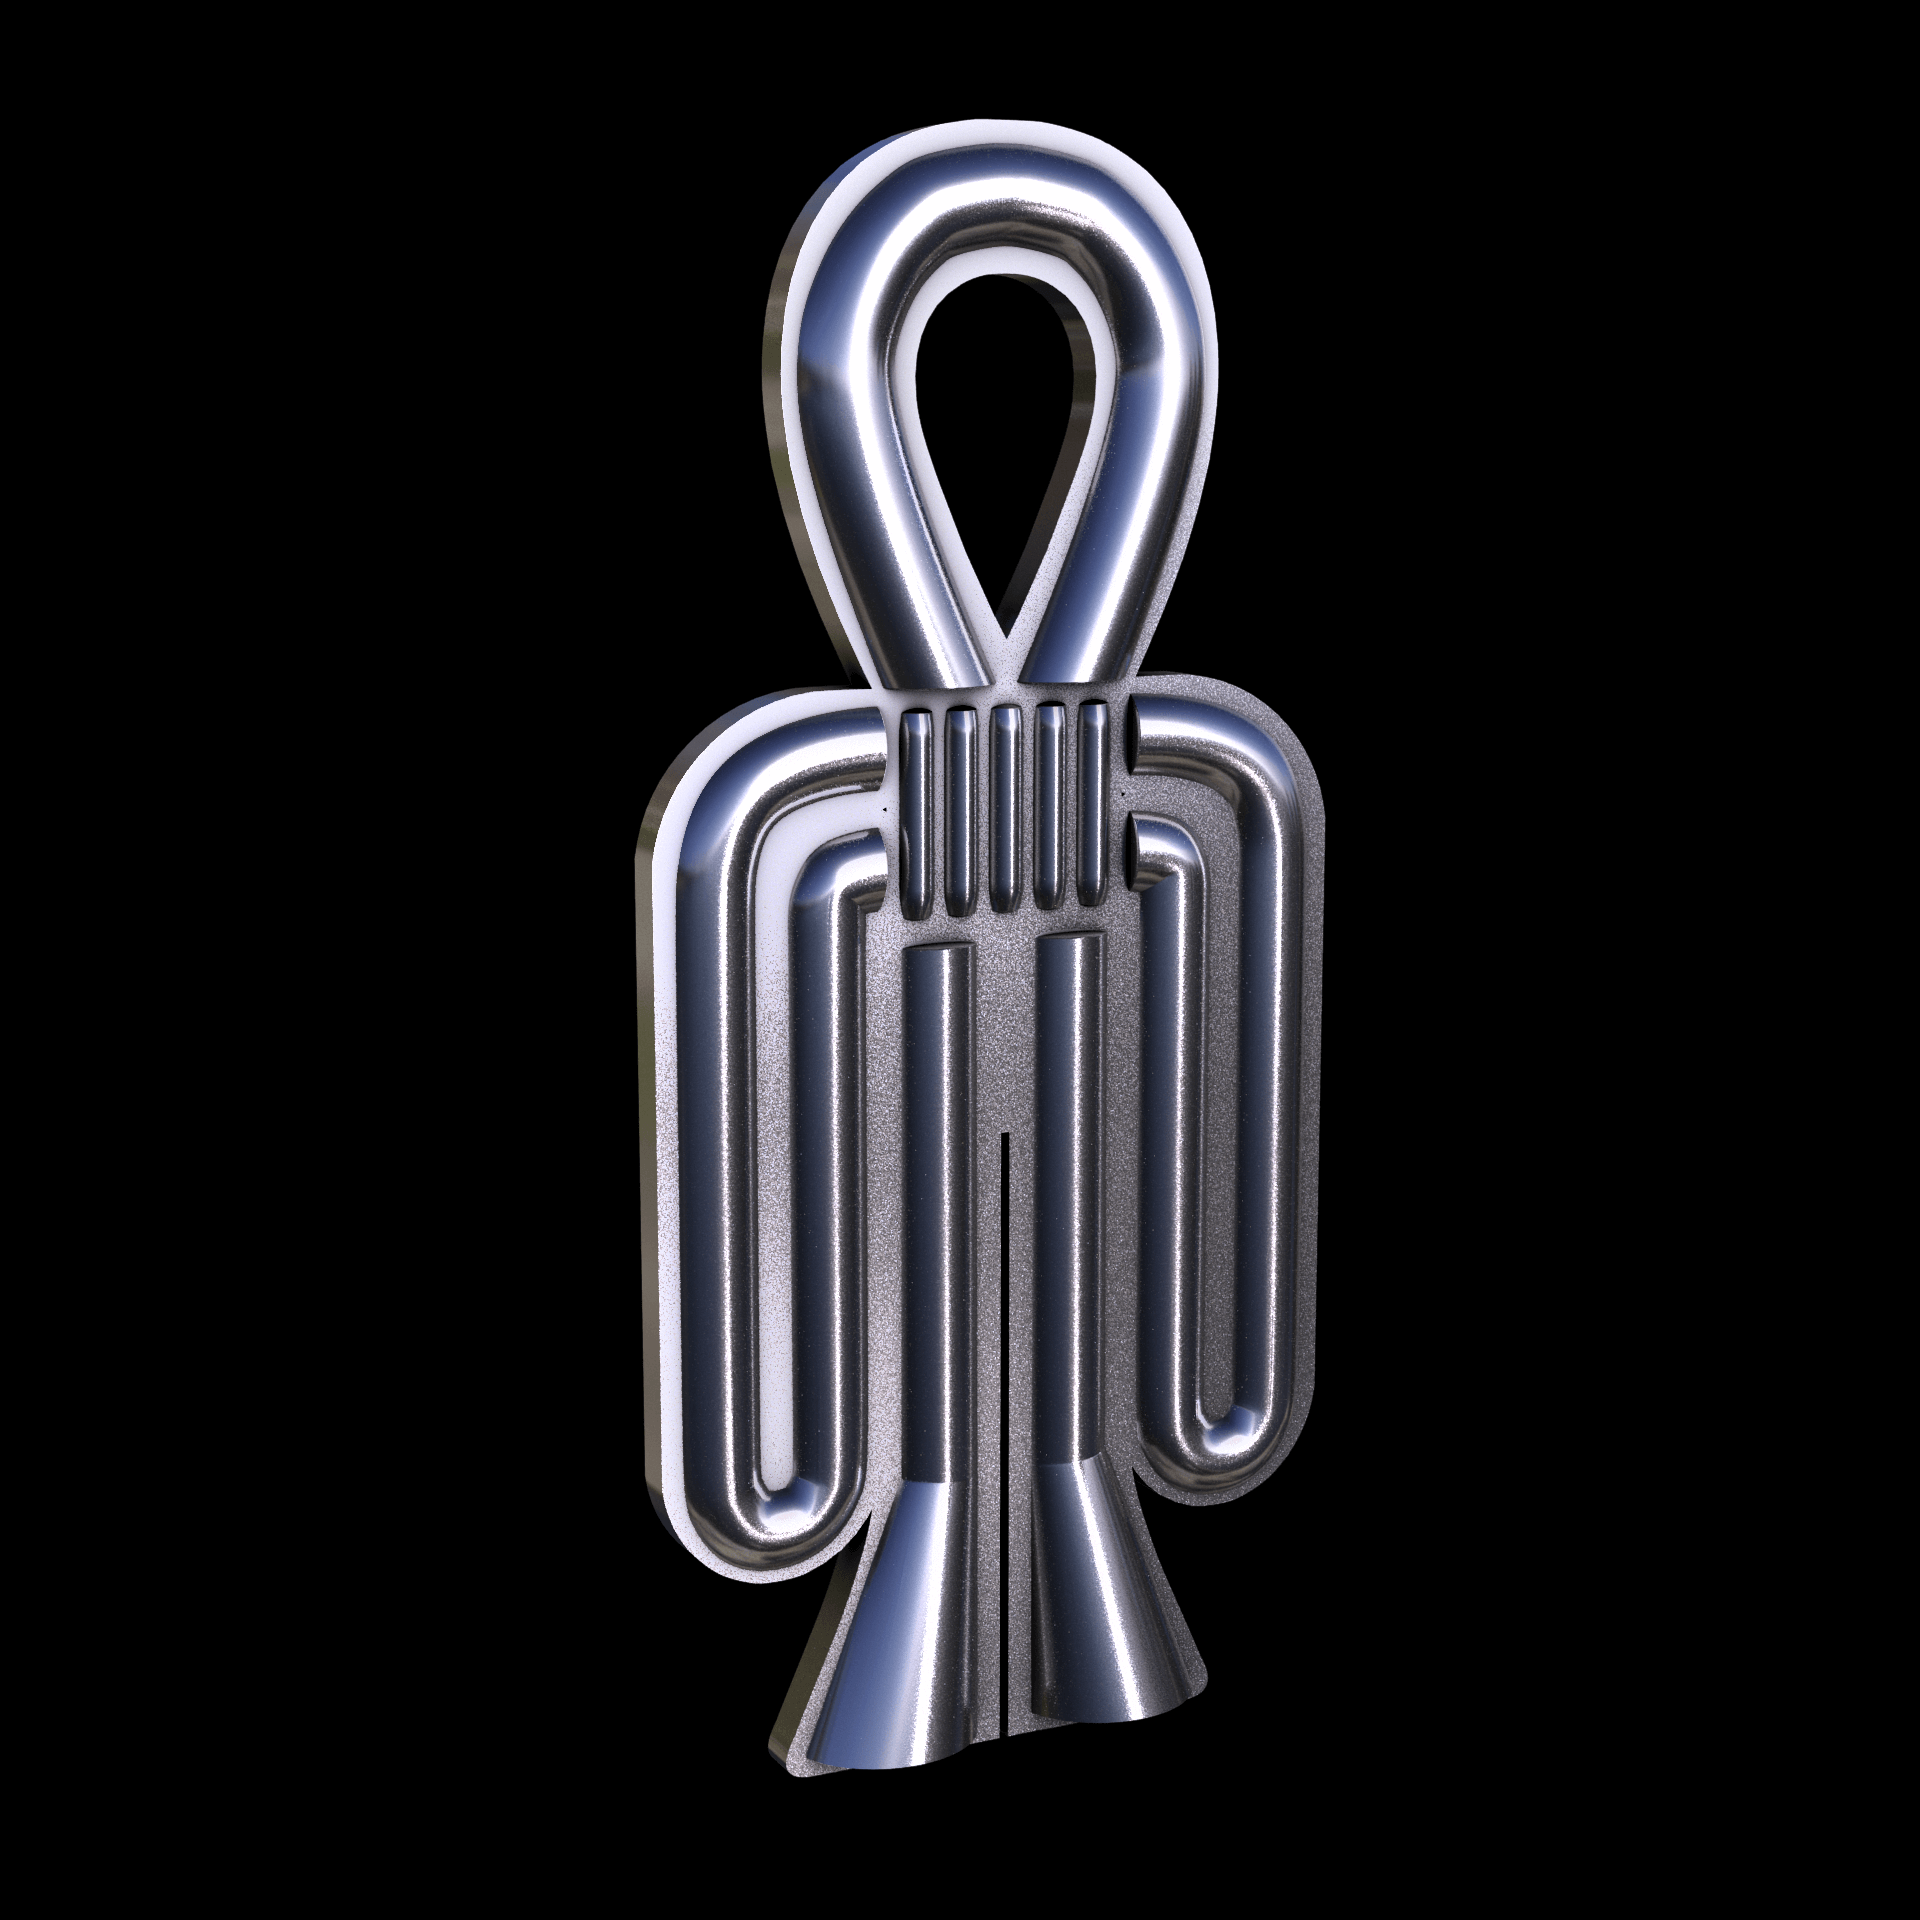 Sterling silver manufactured using wax casting, with a hand polished finish, for a slightly textured, mild sheen surface.